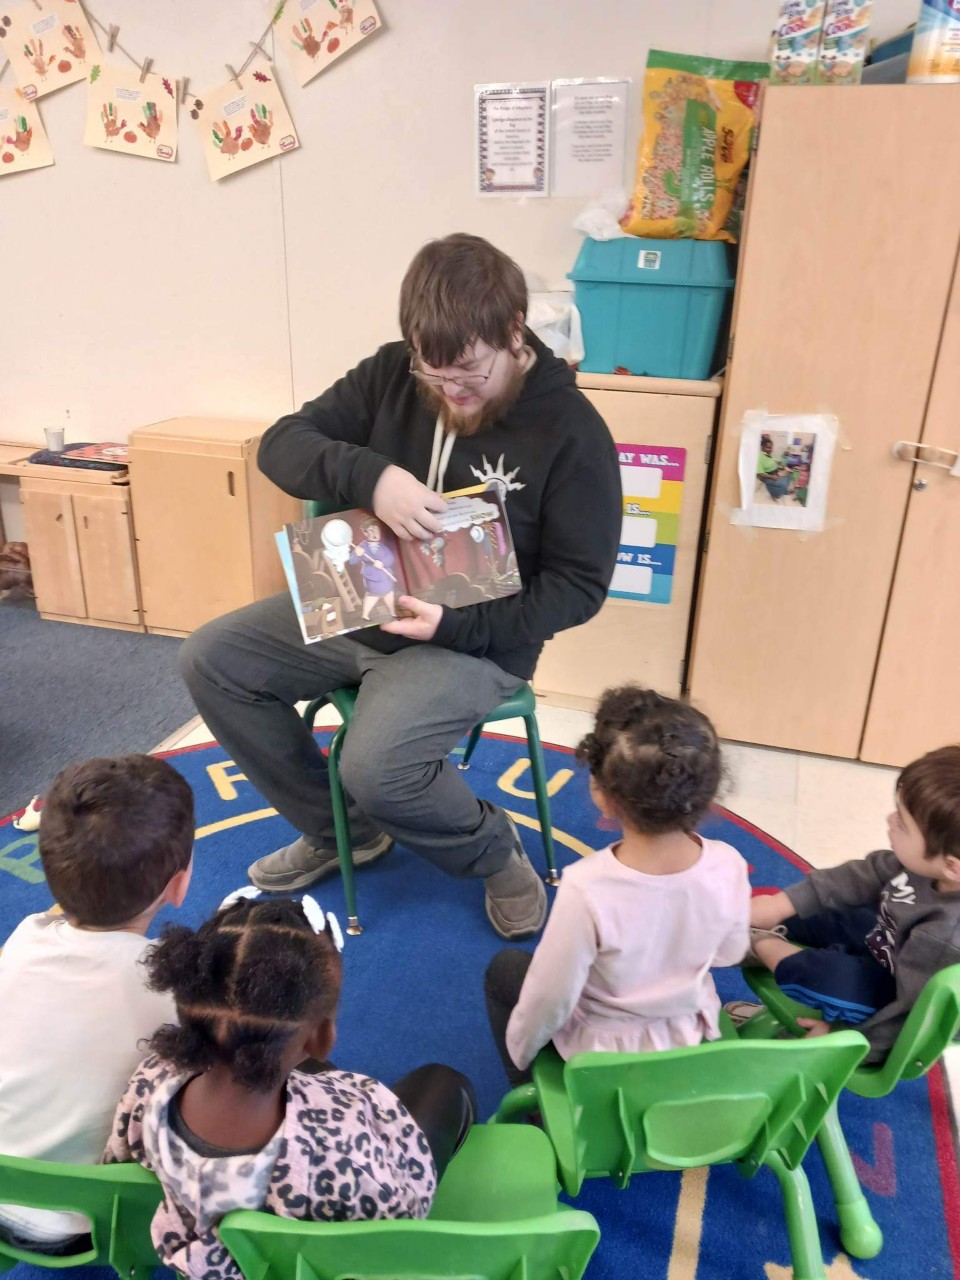 Kolten reading to children at My First Library event